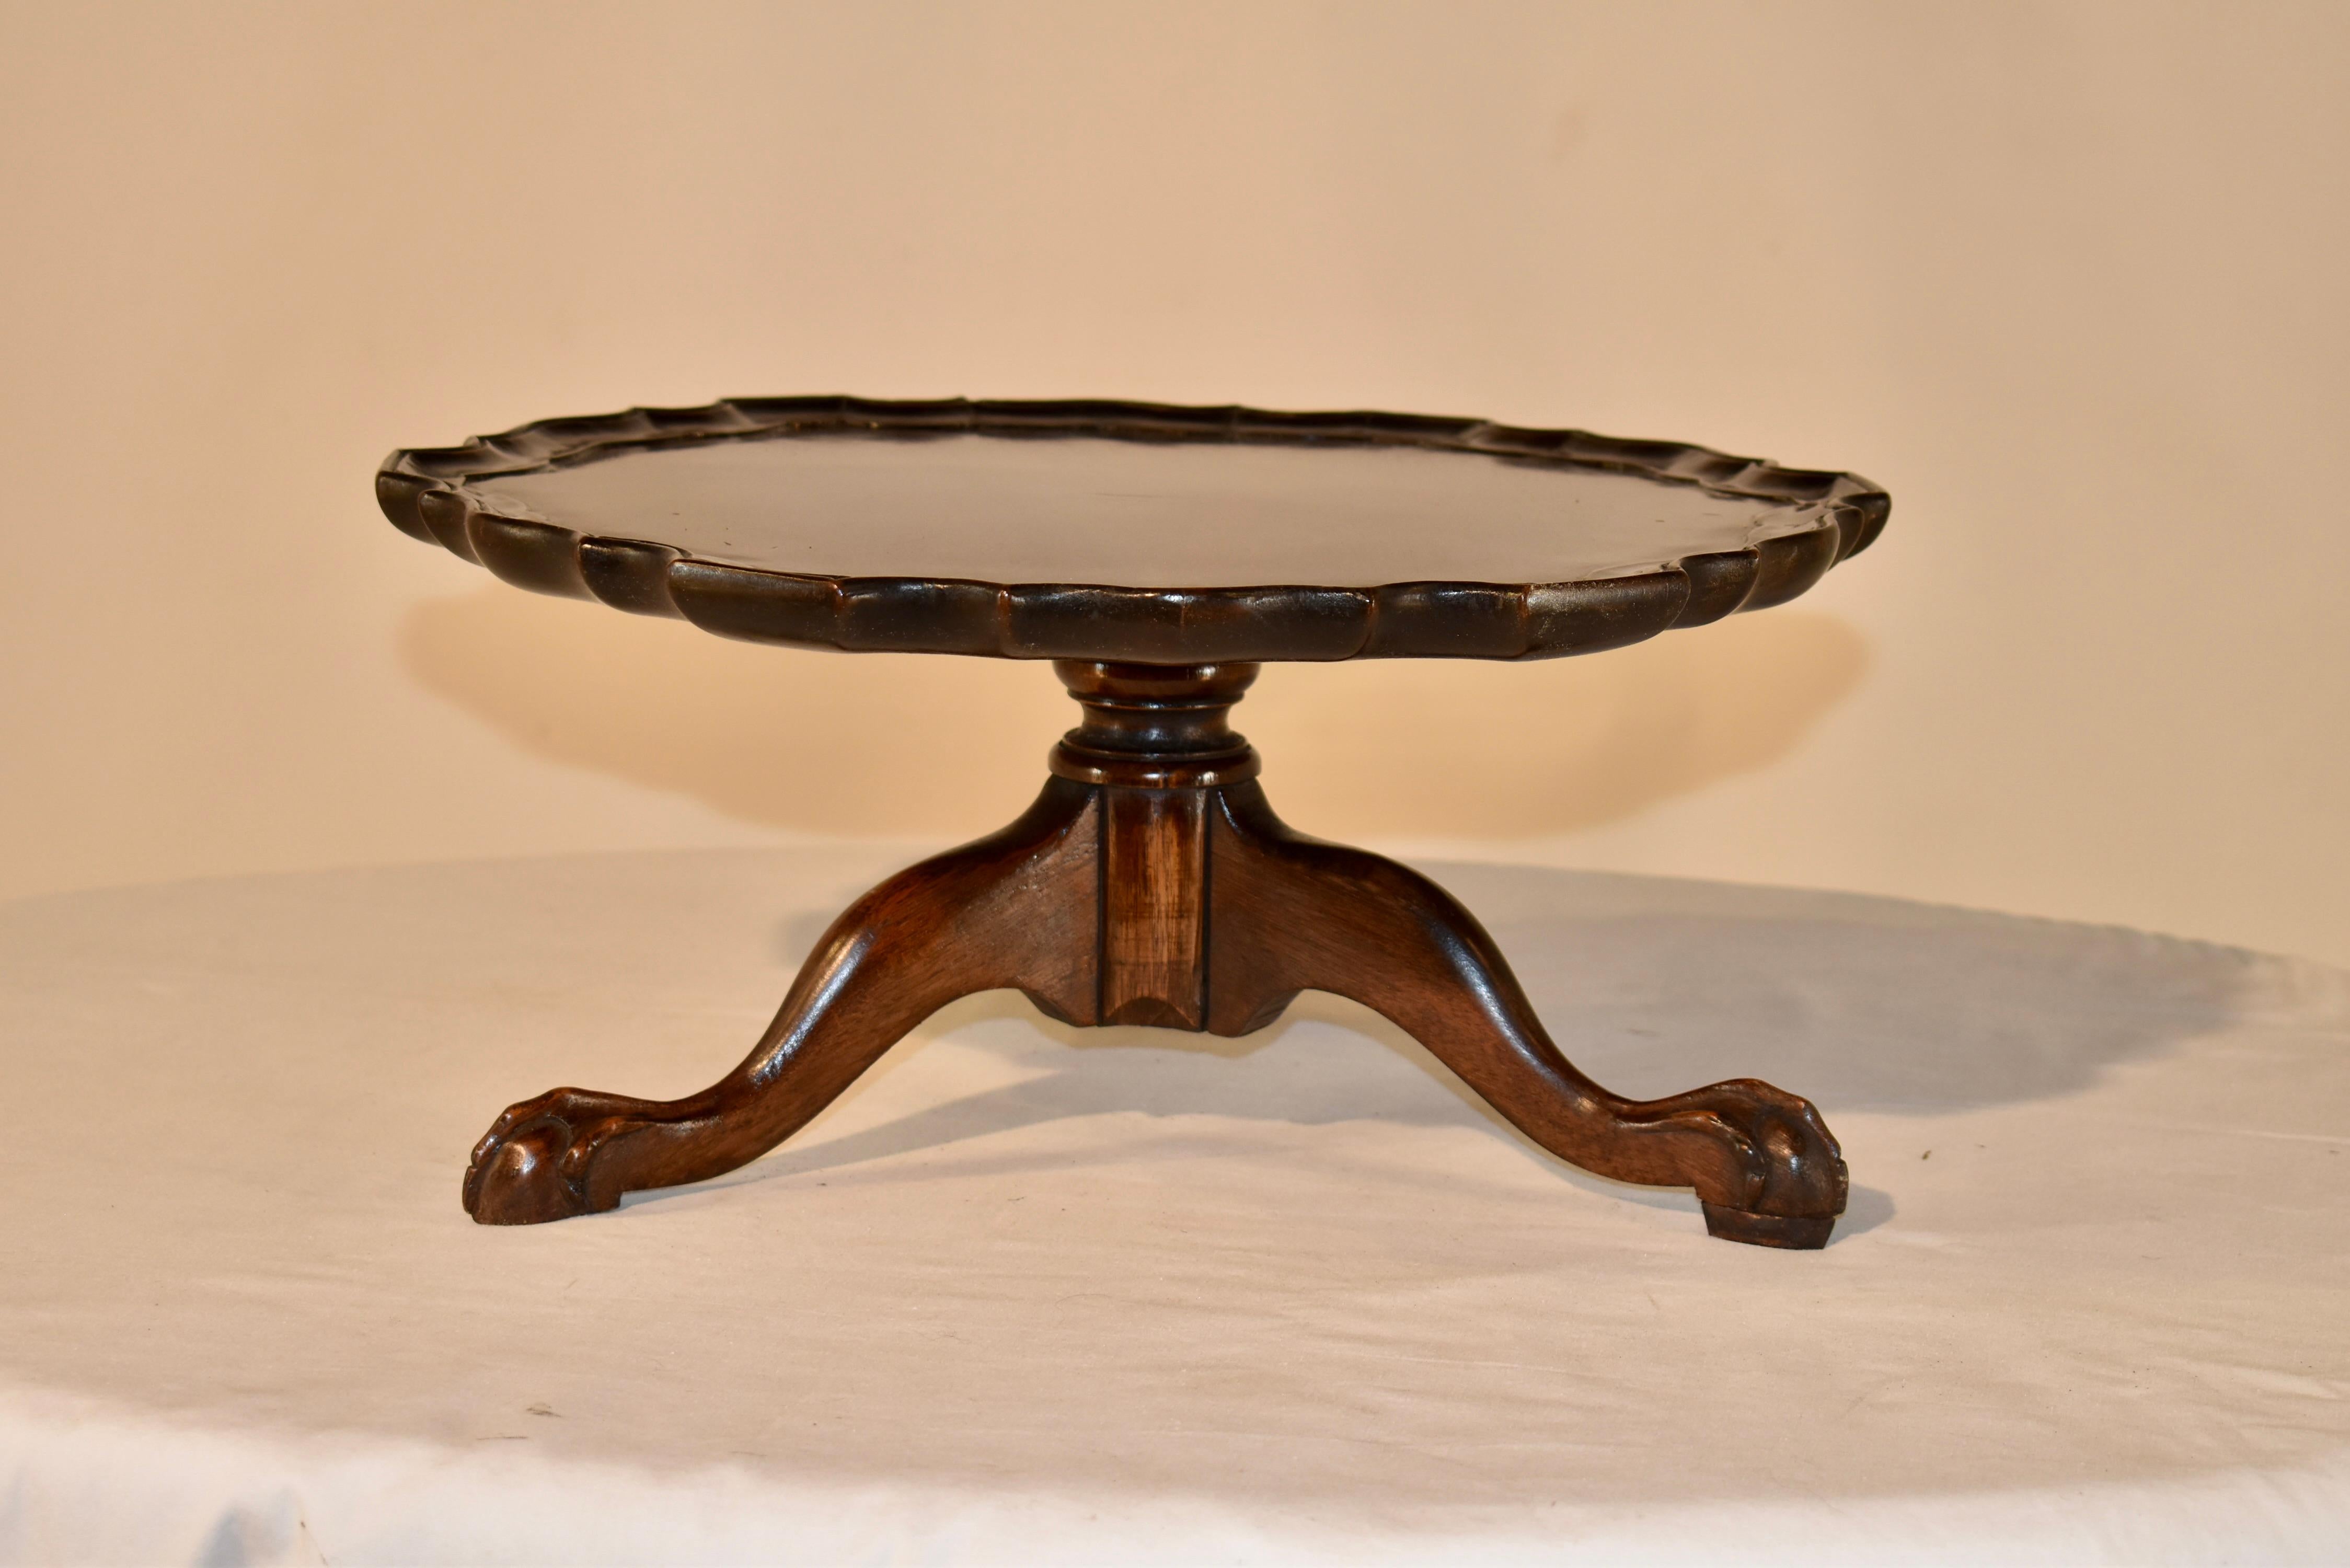 Circa 1900 mahogany lazy Susan from England. The top has a molded pie crust edge, following down to a lovely hand turned tripod base, which terminate in ball and claw feet.